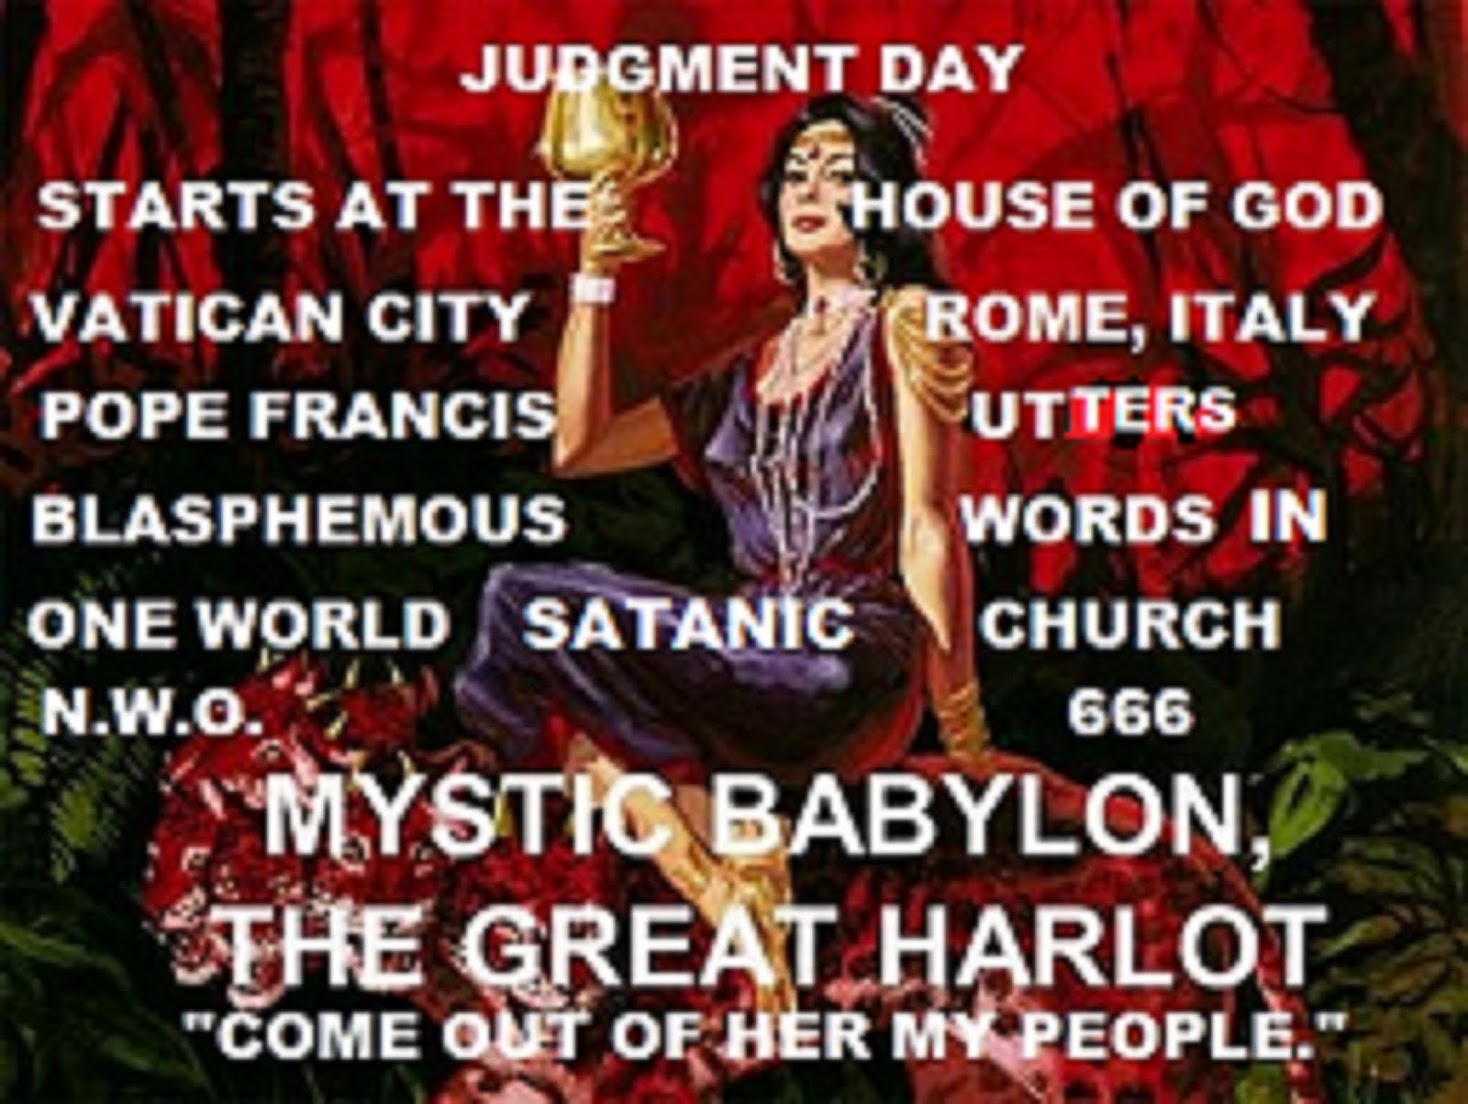 JUDGEMENT DAY ON THE CHURCH AKA "THE GREAT WHORE OF BABYLON"